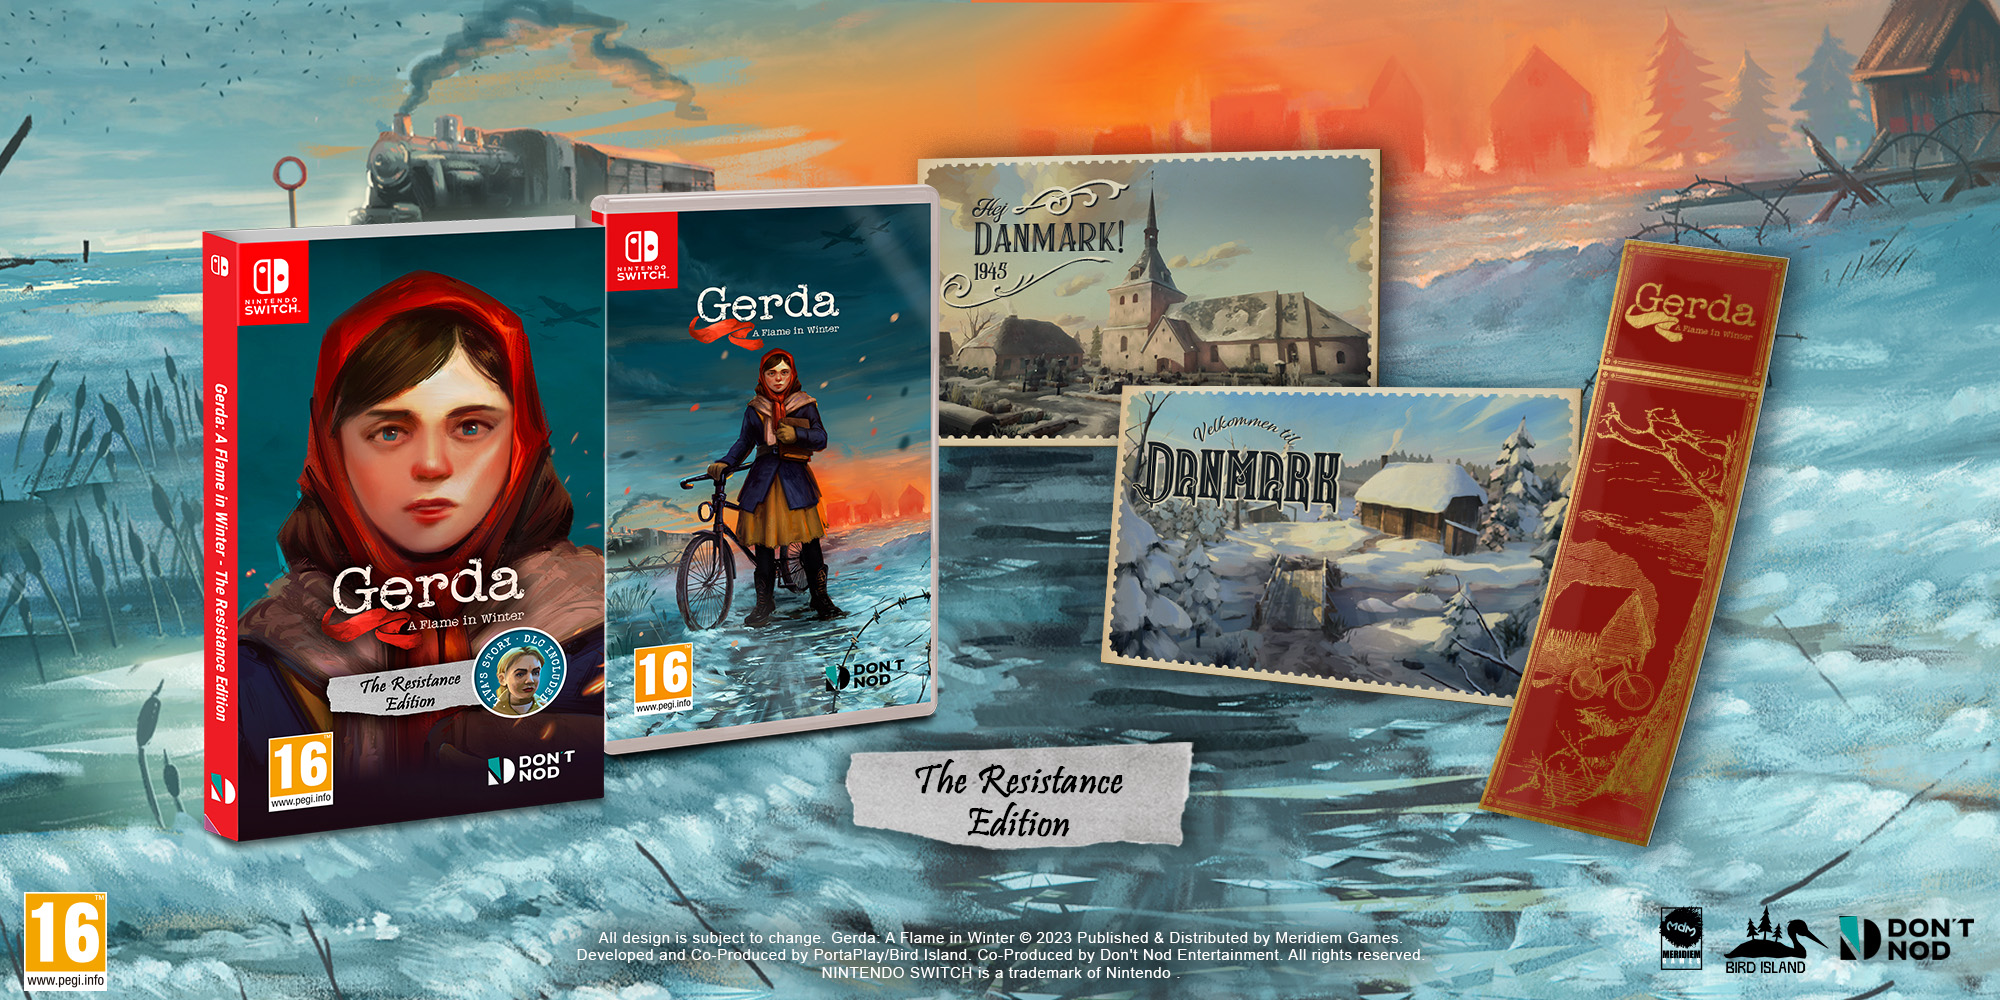 Gerda: A Flame in Winter is coming to retail stores in the EU!